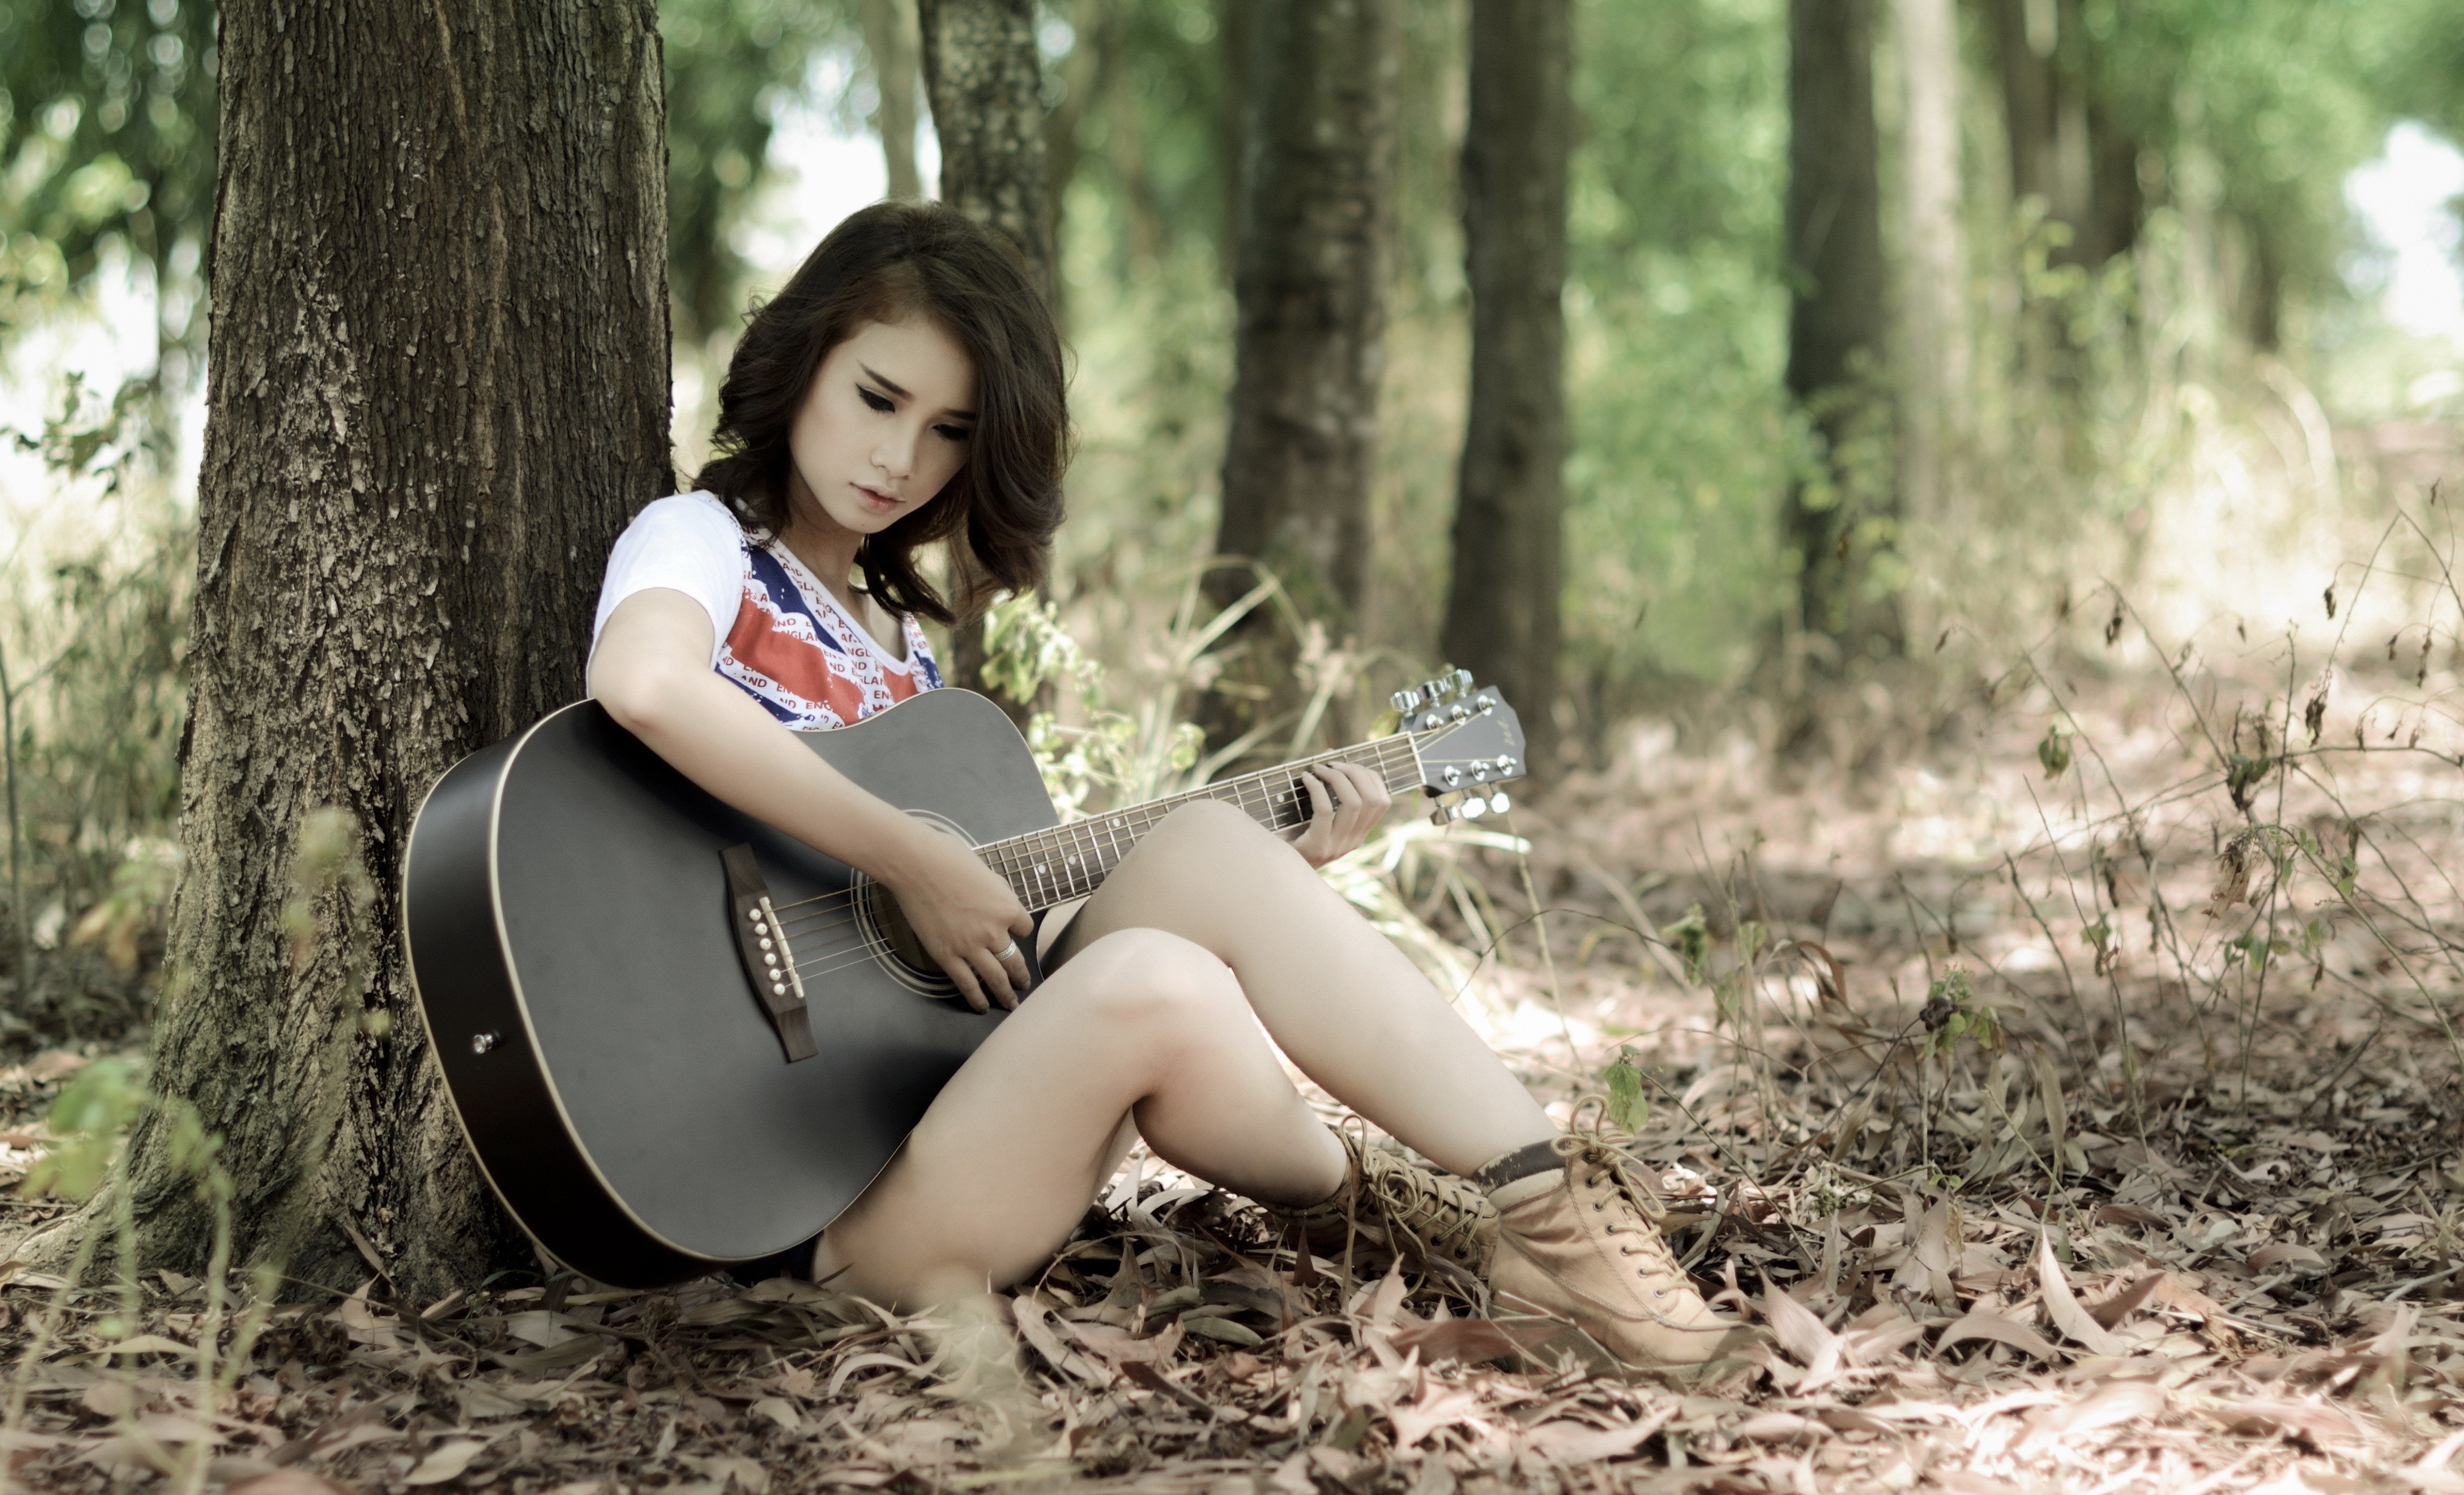 women, Model, Asian, Long hair, Musicians, Guitar, Sitting, Women outdoors, Nature, Trees, T shirt, Legs, Forest, Leaves, Playing, Looking down Wallpaper